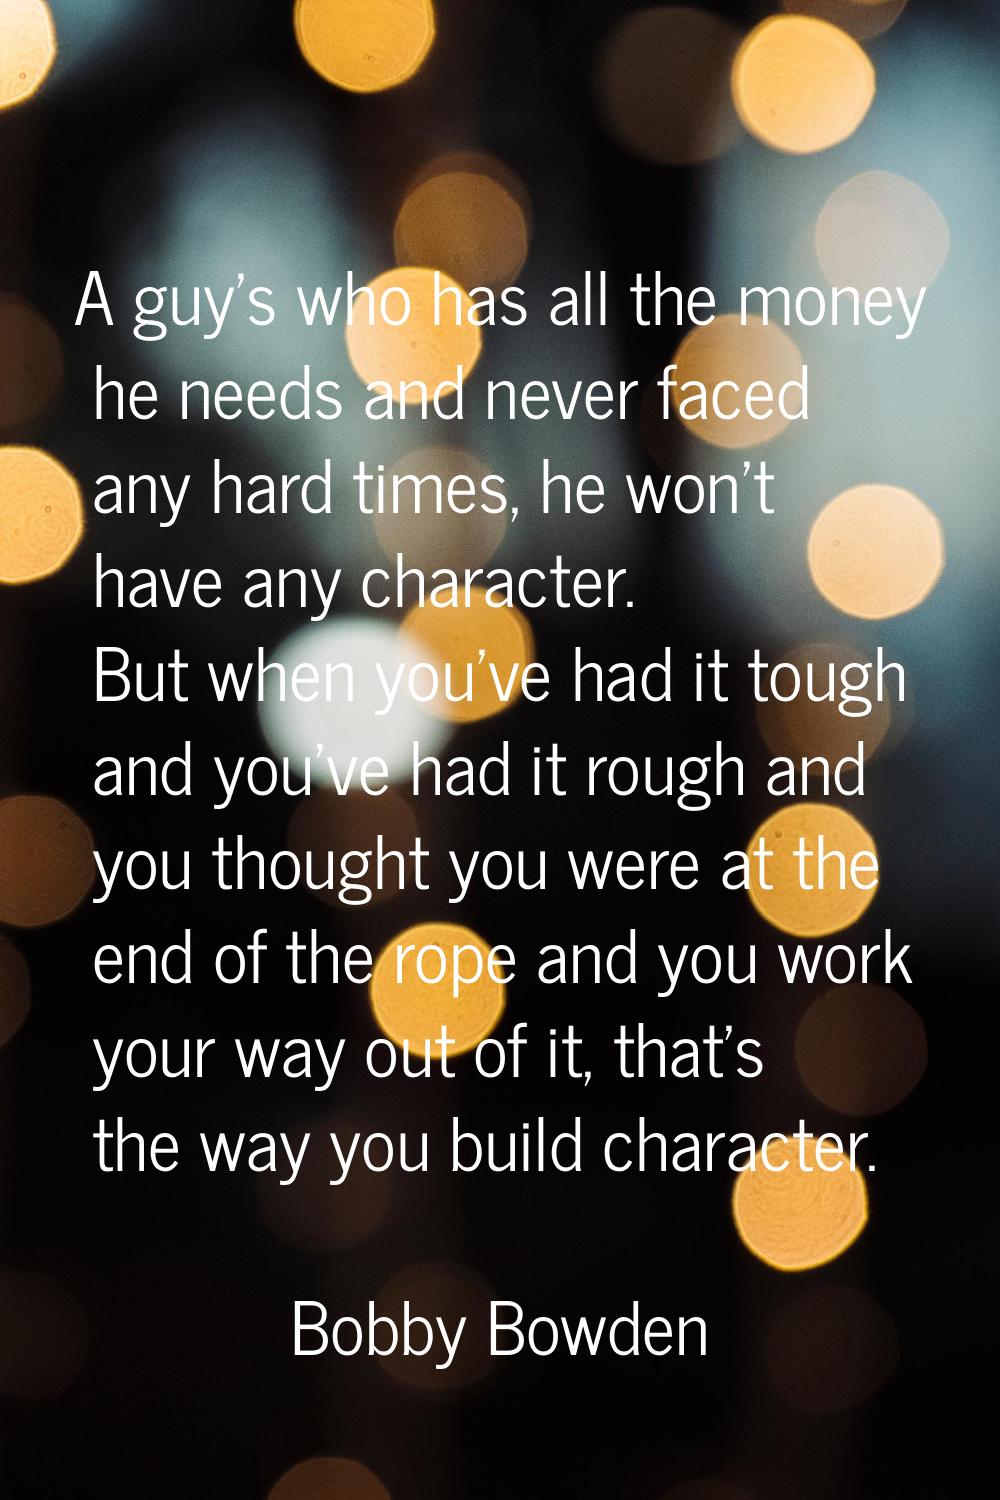 A guy's who has all the money he needs and never faced any hard times, he won't have any character.